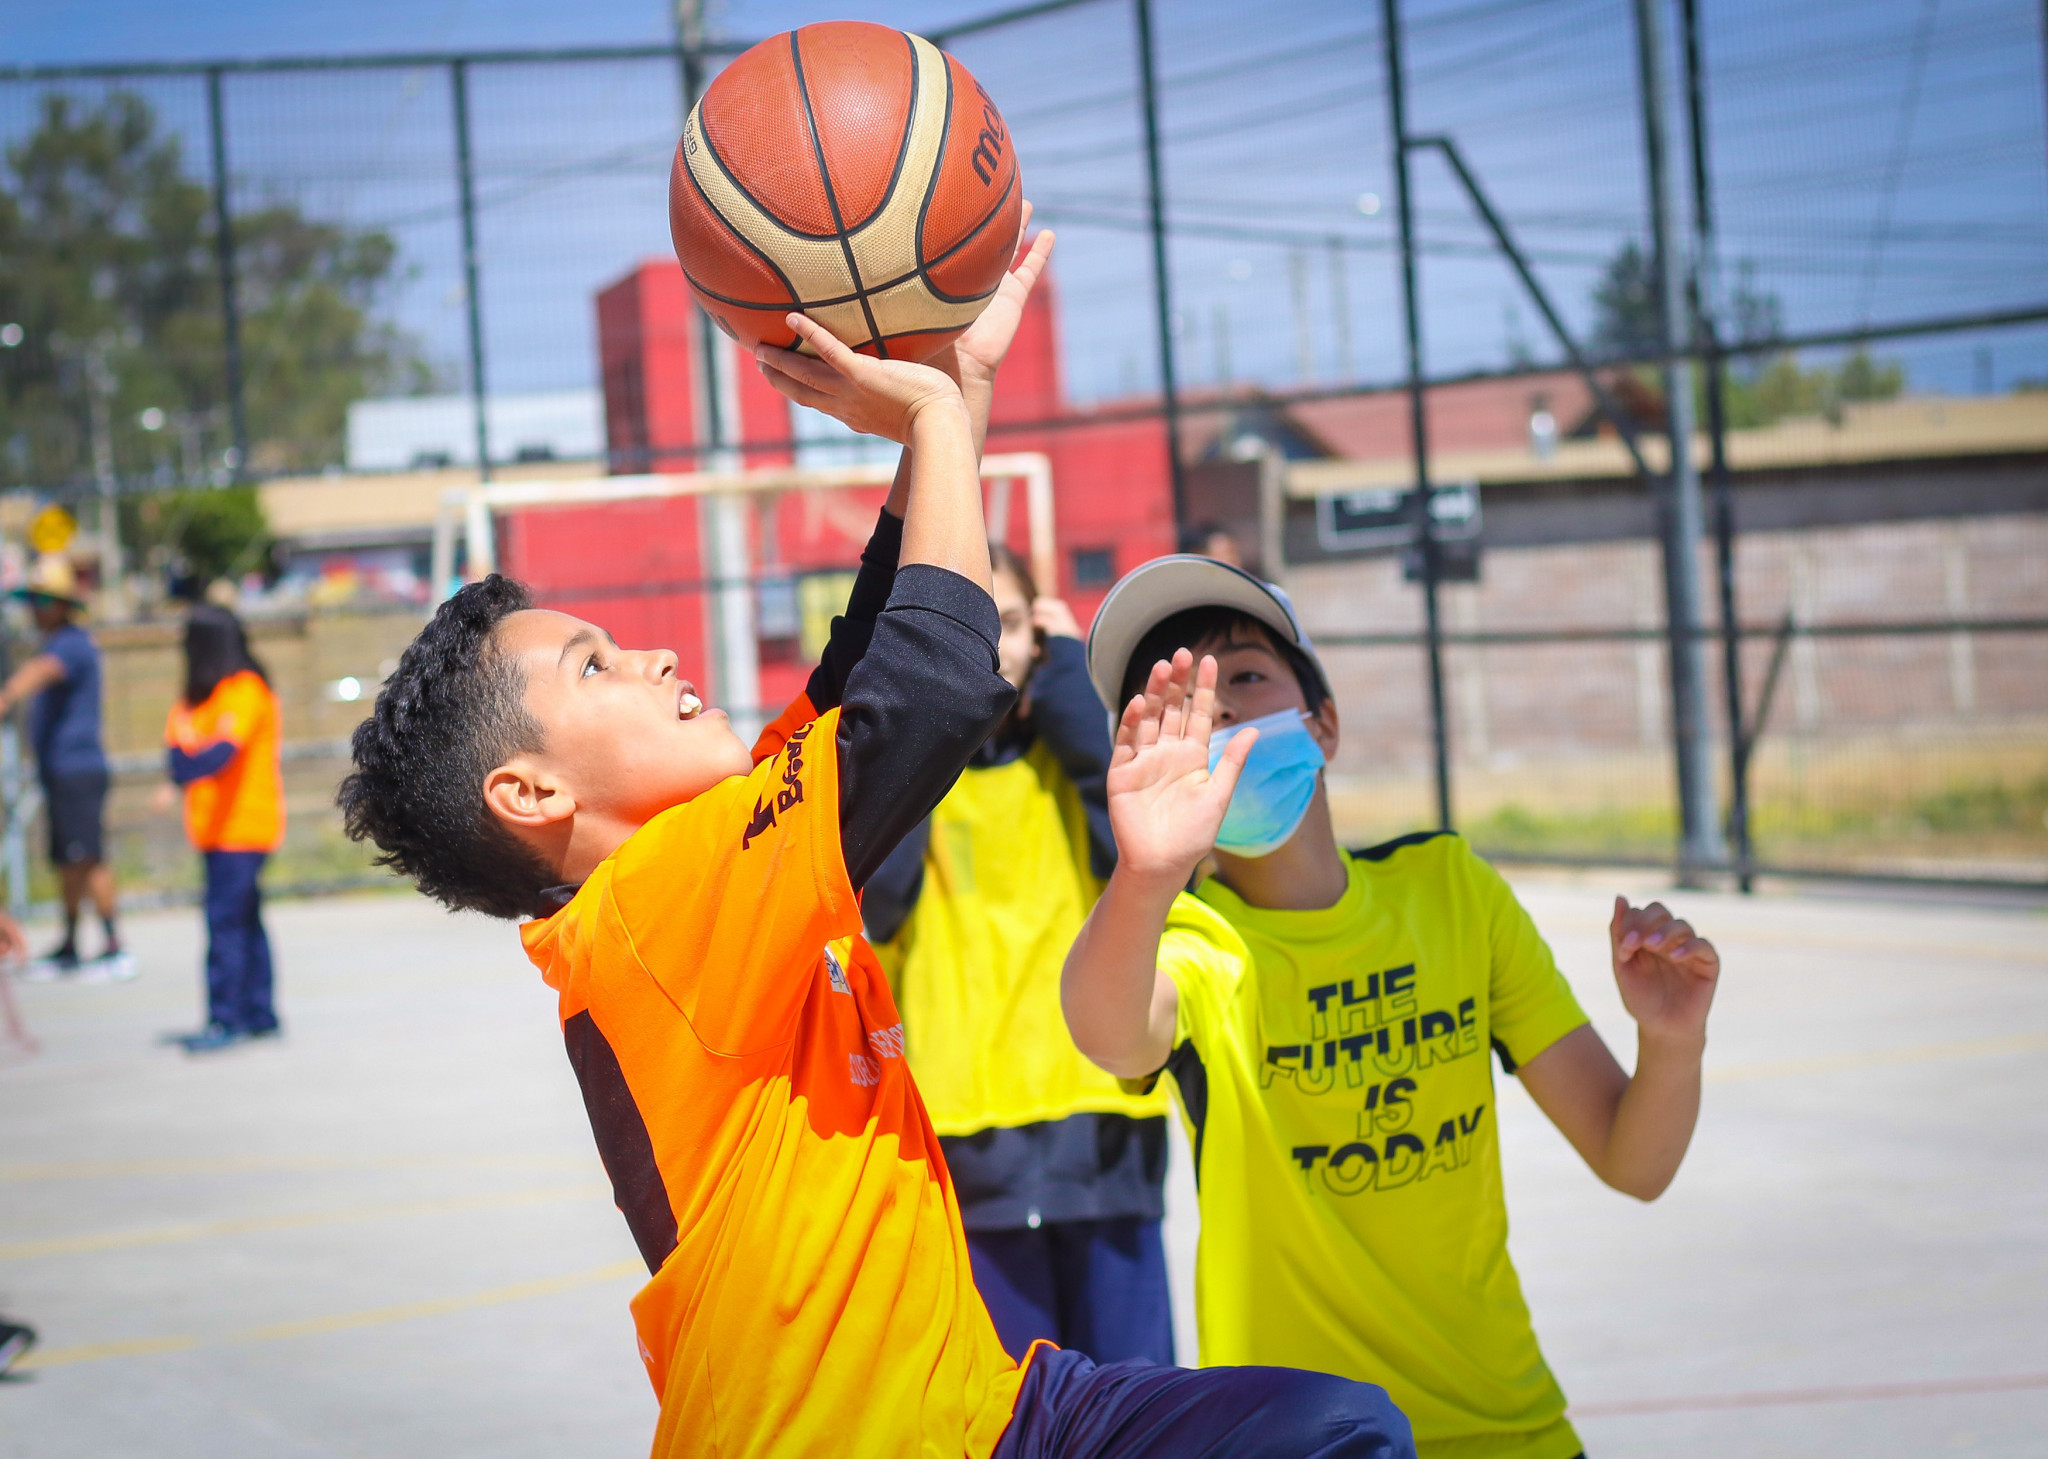 3x3 basketball is one of several sports that was taught in the Santiago 2023 educational programmes ©Santiago 2023